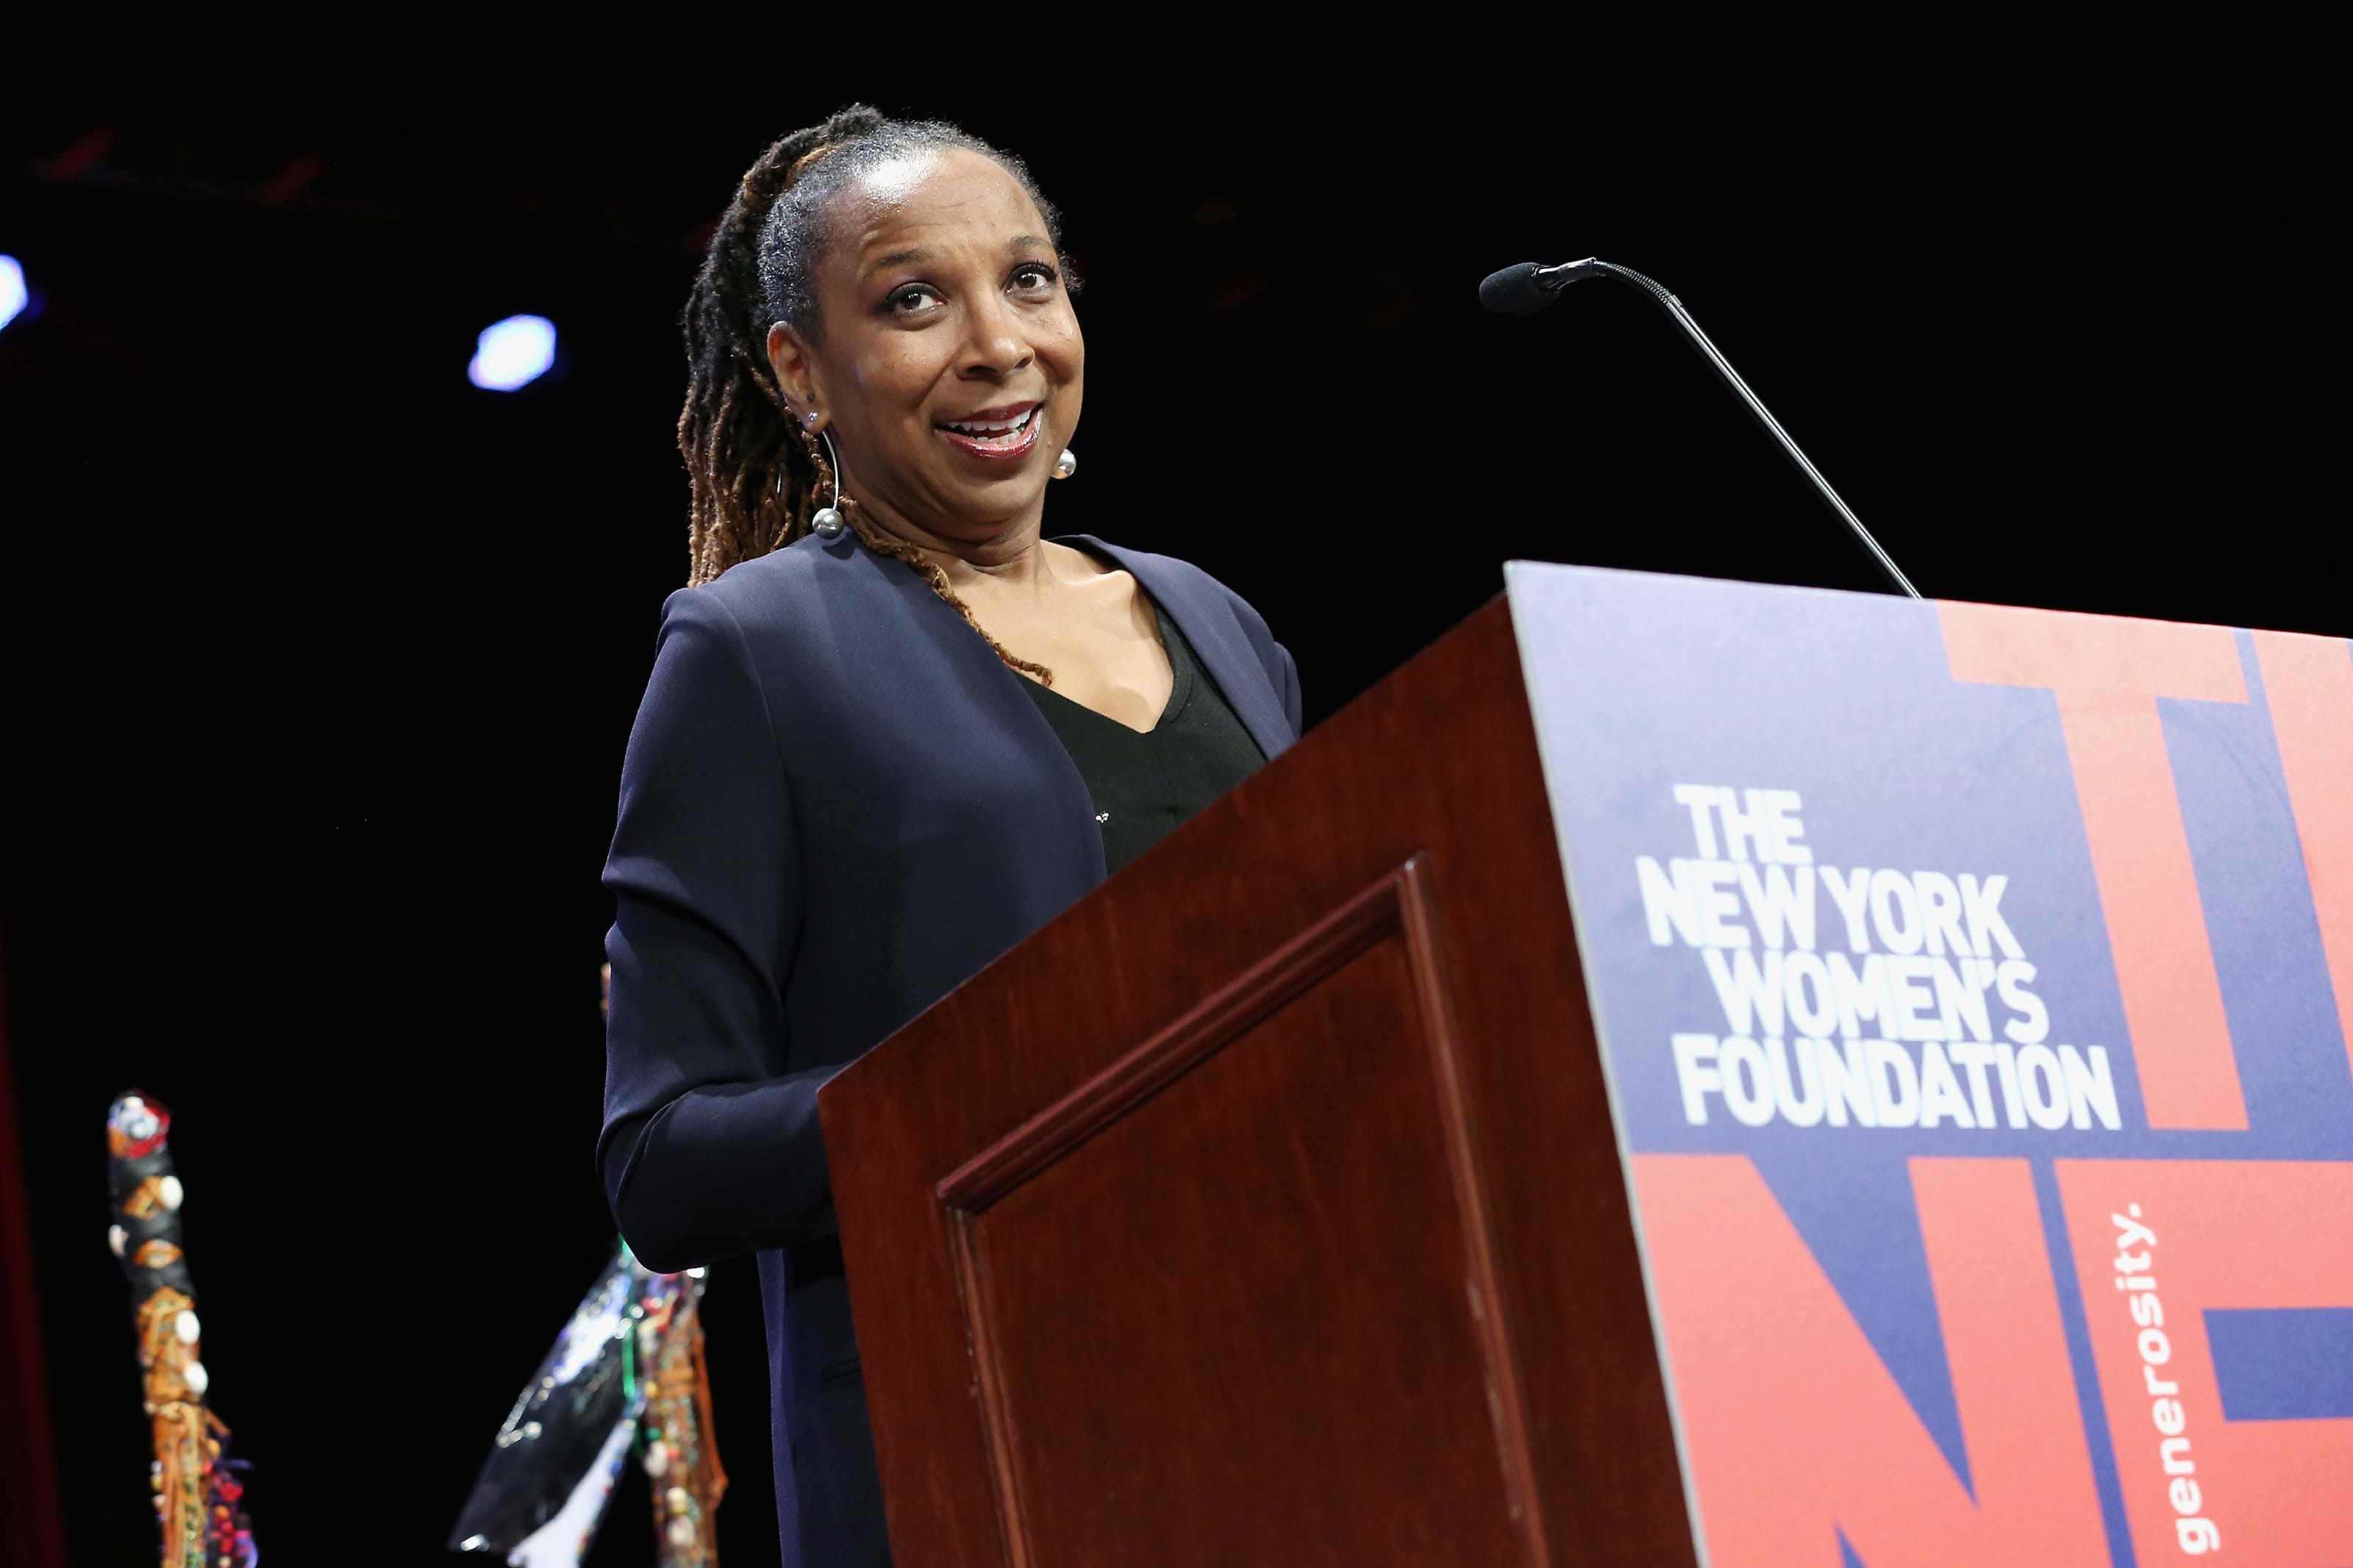 Kimberlé Crenshaw speaks at a podium that is labeled "The New York Women's Foundation"